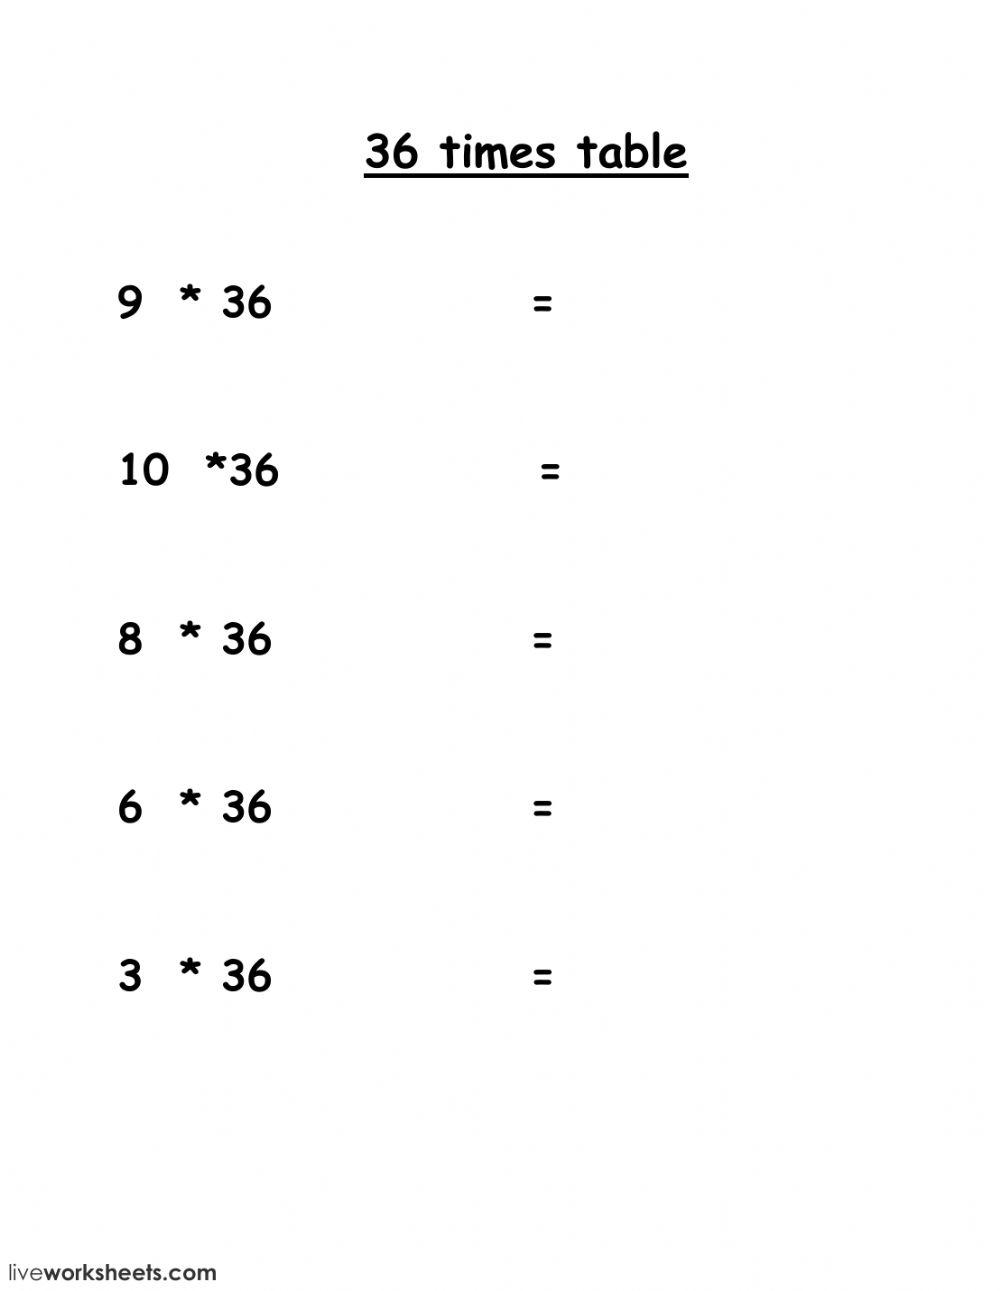 36 times table